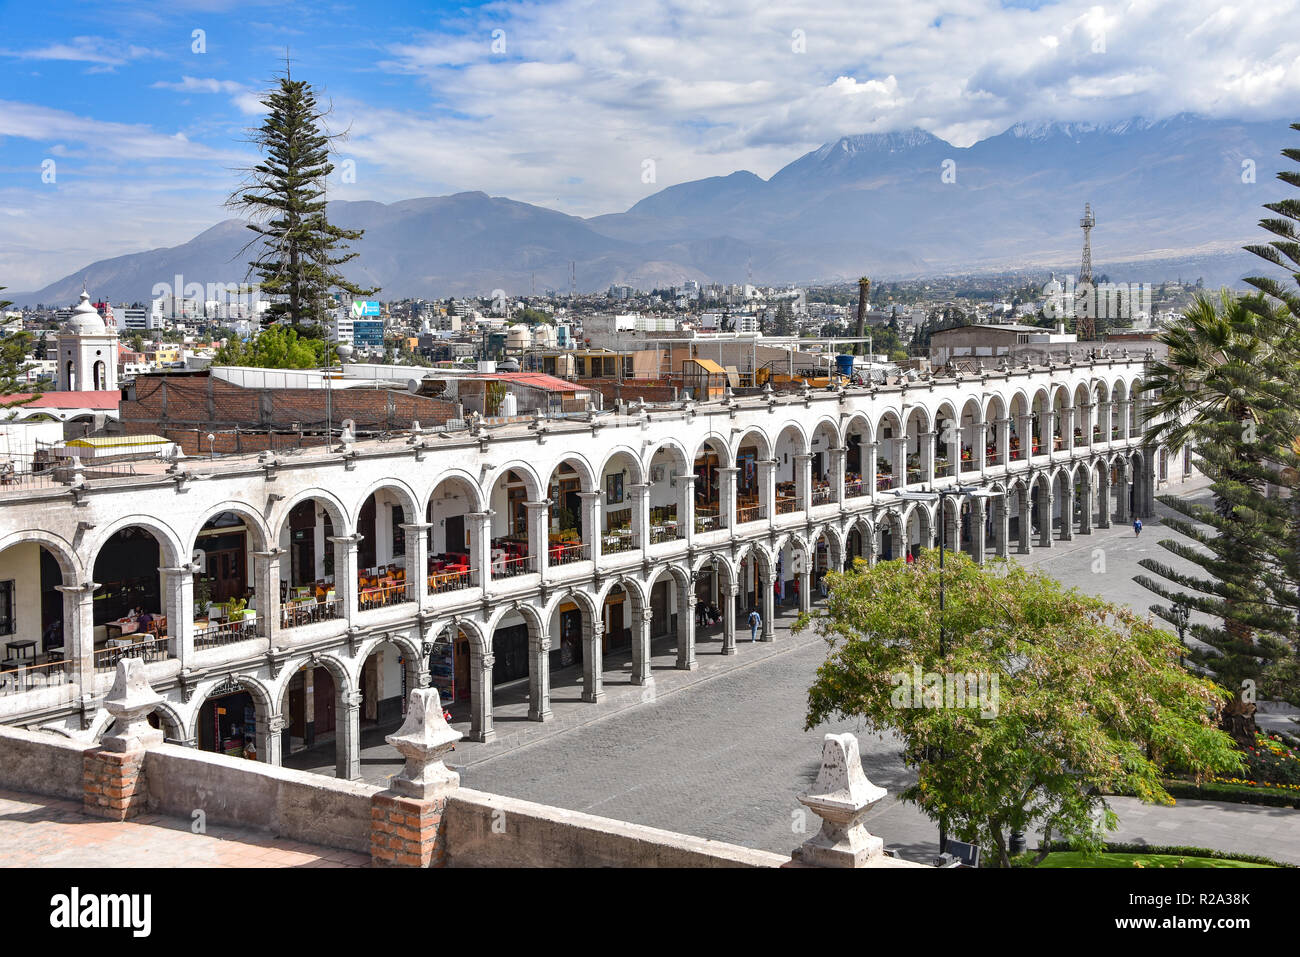 Arequipa, Peru - October 7, 2018: Colonial buildings and archways made of white Sillar stone in the Plaza de Armas, Arequipa Stock Photo